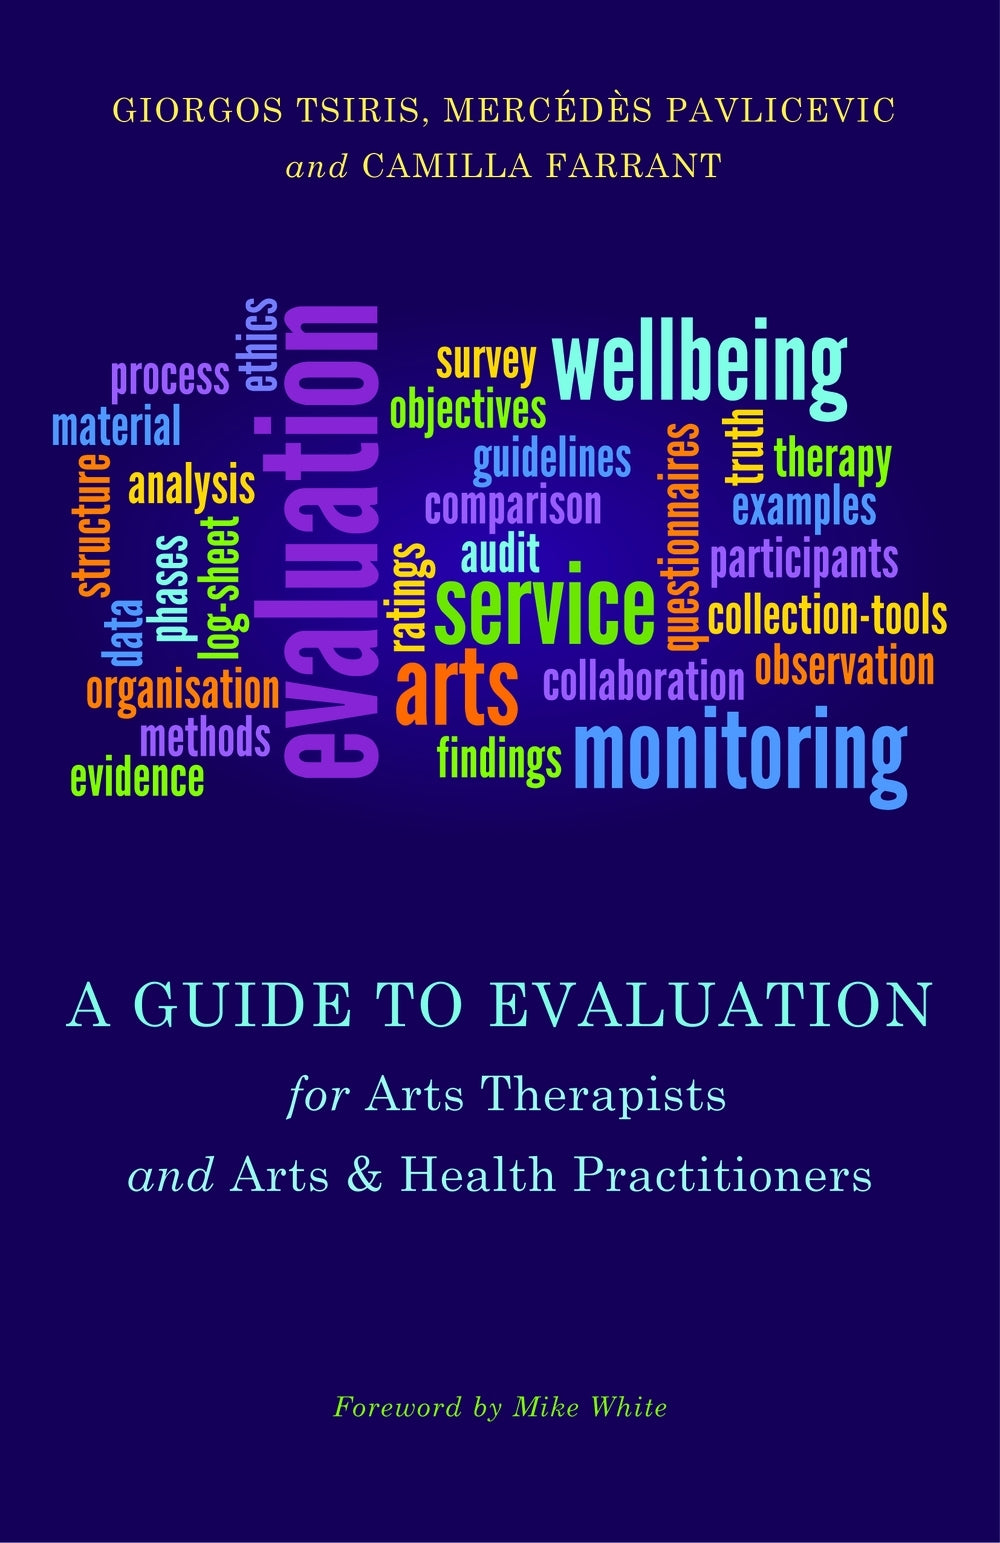 A Guide to Evaluation for Arts Therapists and Arts & Health Practitioners by Mike White, Mercedes Pavlicevic, Giorgos Tsiris, Camilla Farrant